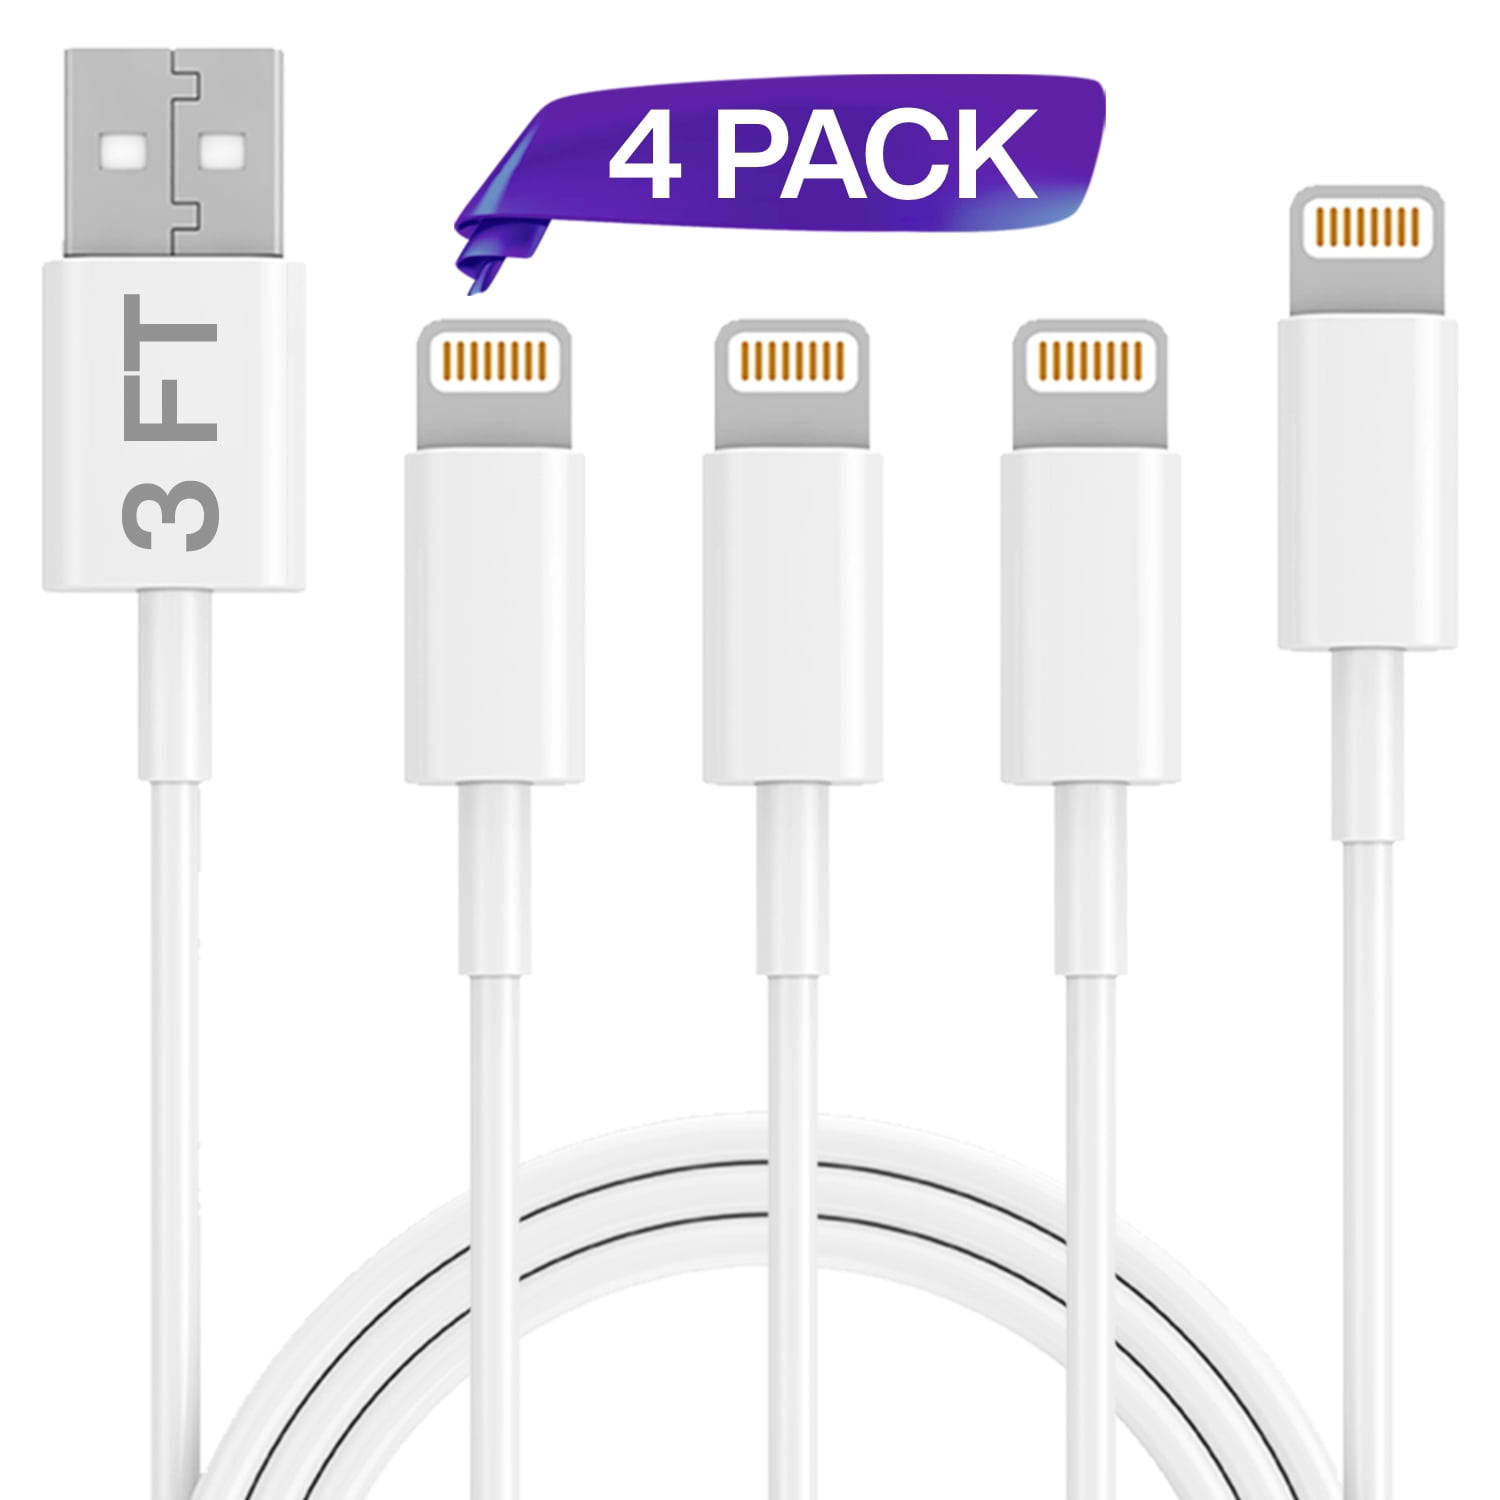 Infinite Power MFI Certified 4 Pack 3FT USB Cable for Apple iPhone Xs,Xs Max,XR,X,8,8 Plus,7,7 Plus,6S,6S Plus,iPad Air,Mini,iPod Touch,Case Charging & Syncing Cord iPhone Lightning Cable 